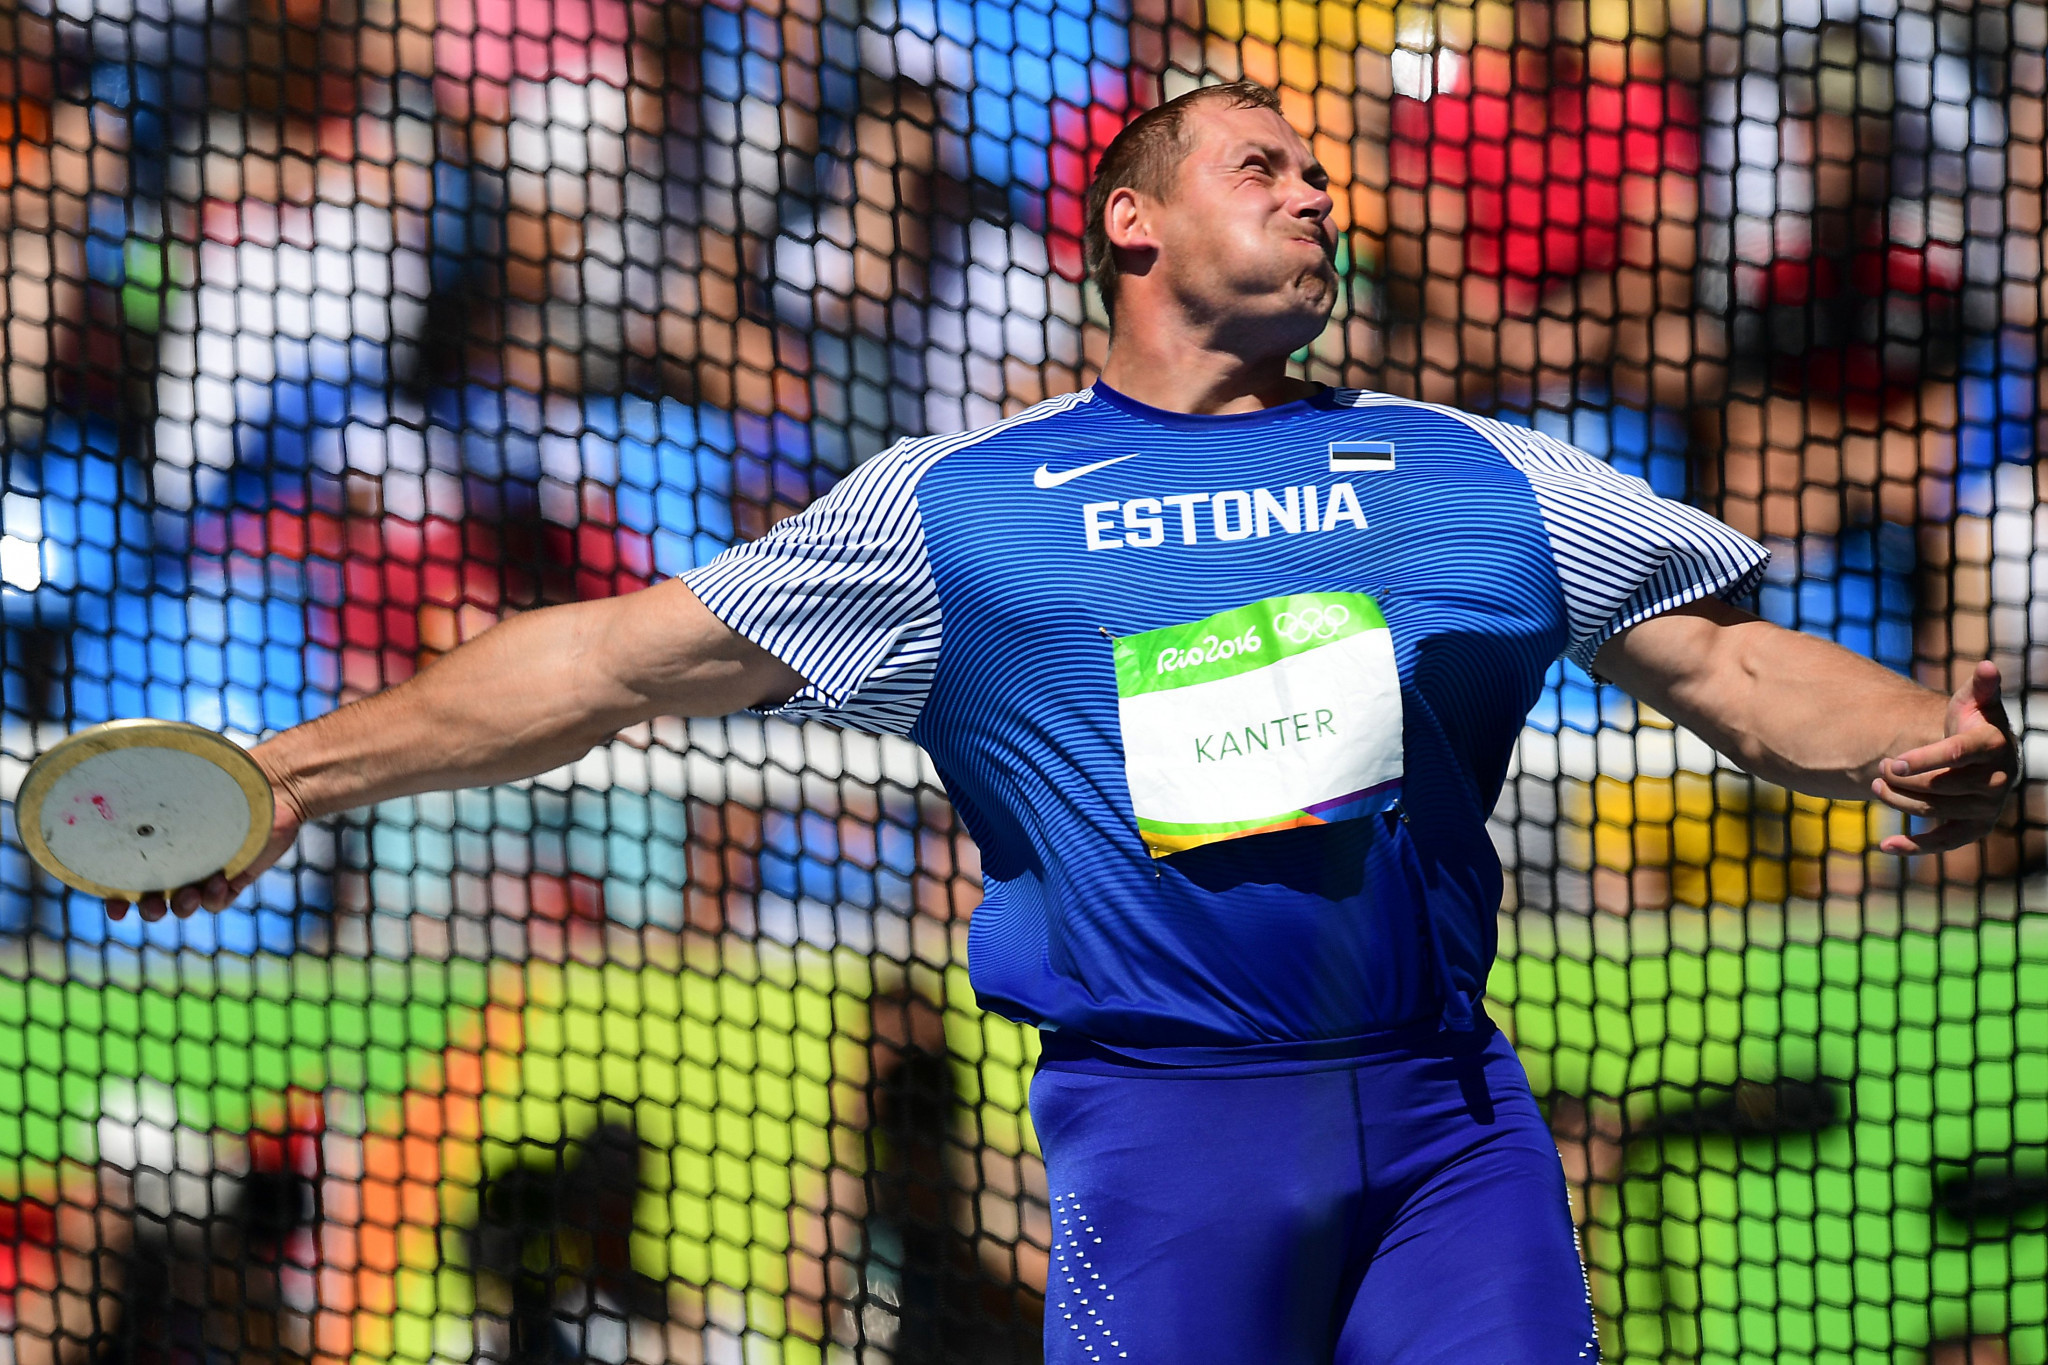 Gerd Kanter is the chairman of the EOC Athletes' Commission ©Getty Images